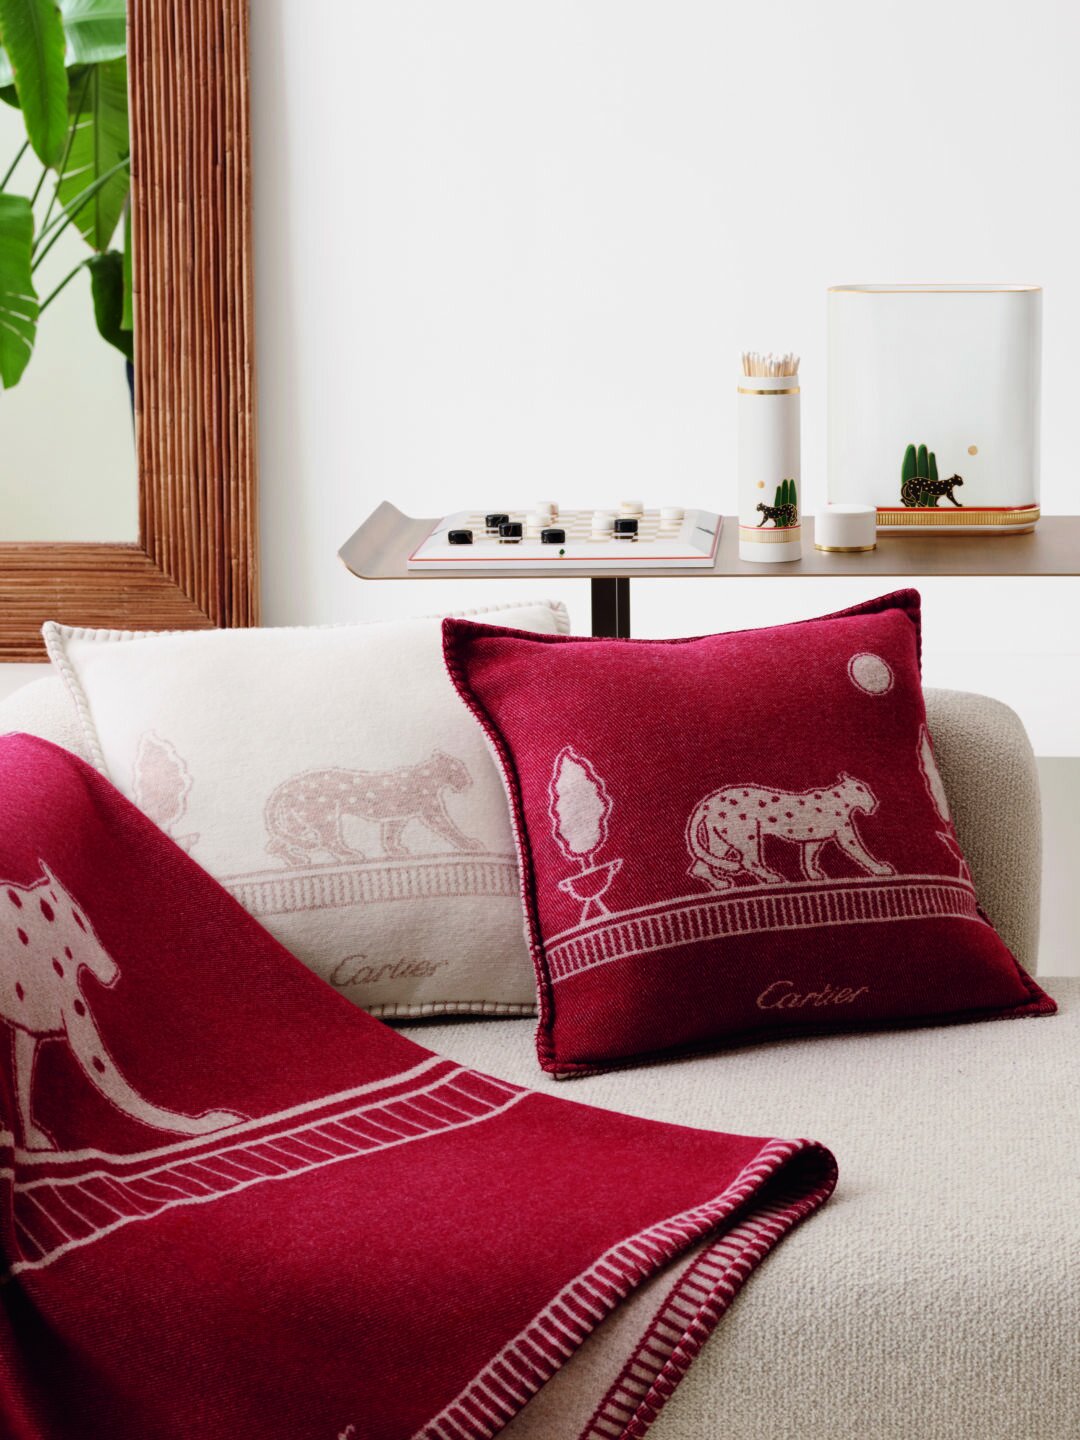 Decorate Your Home This Lunar New Year With Designer Homeware From Cartier And More